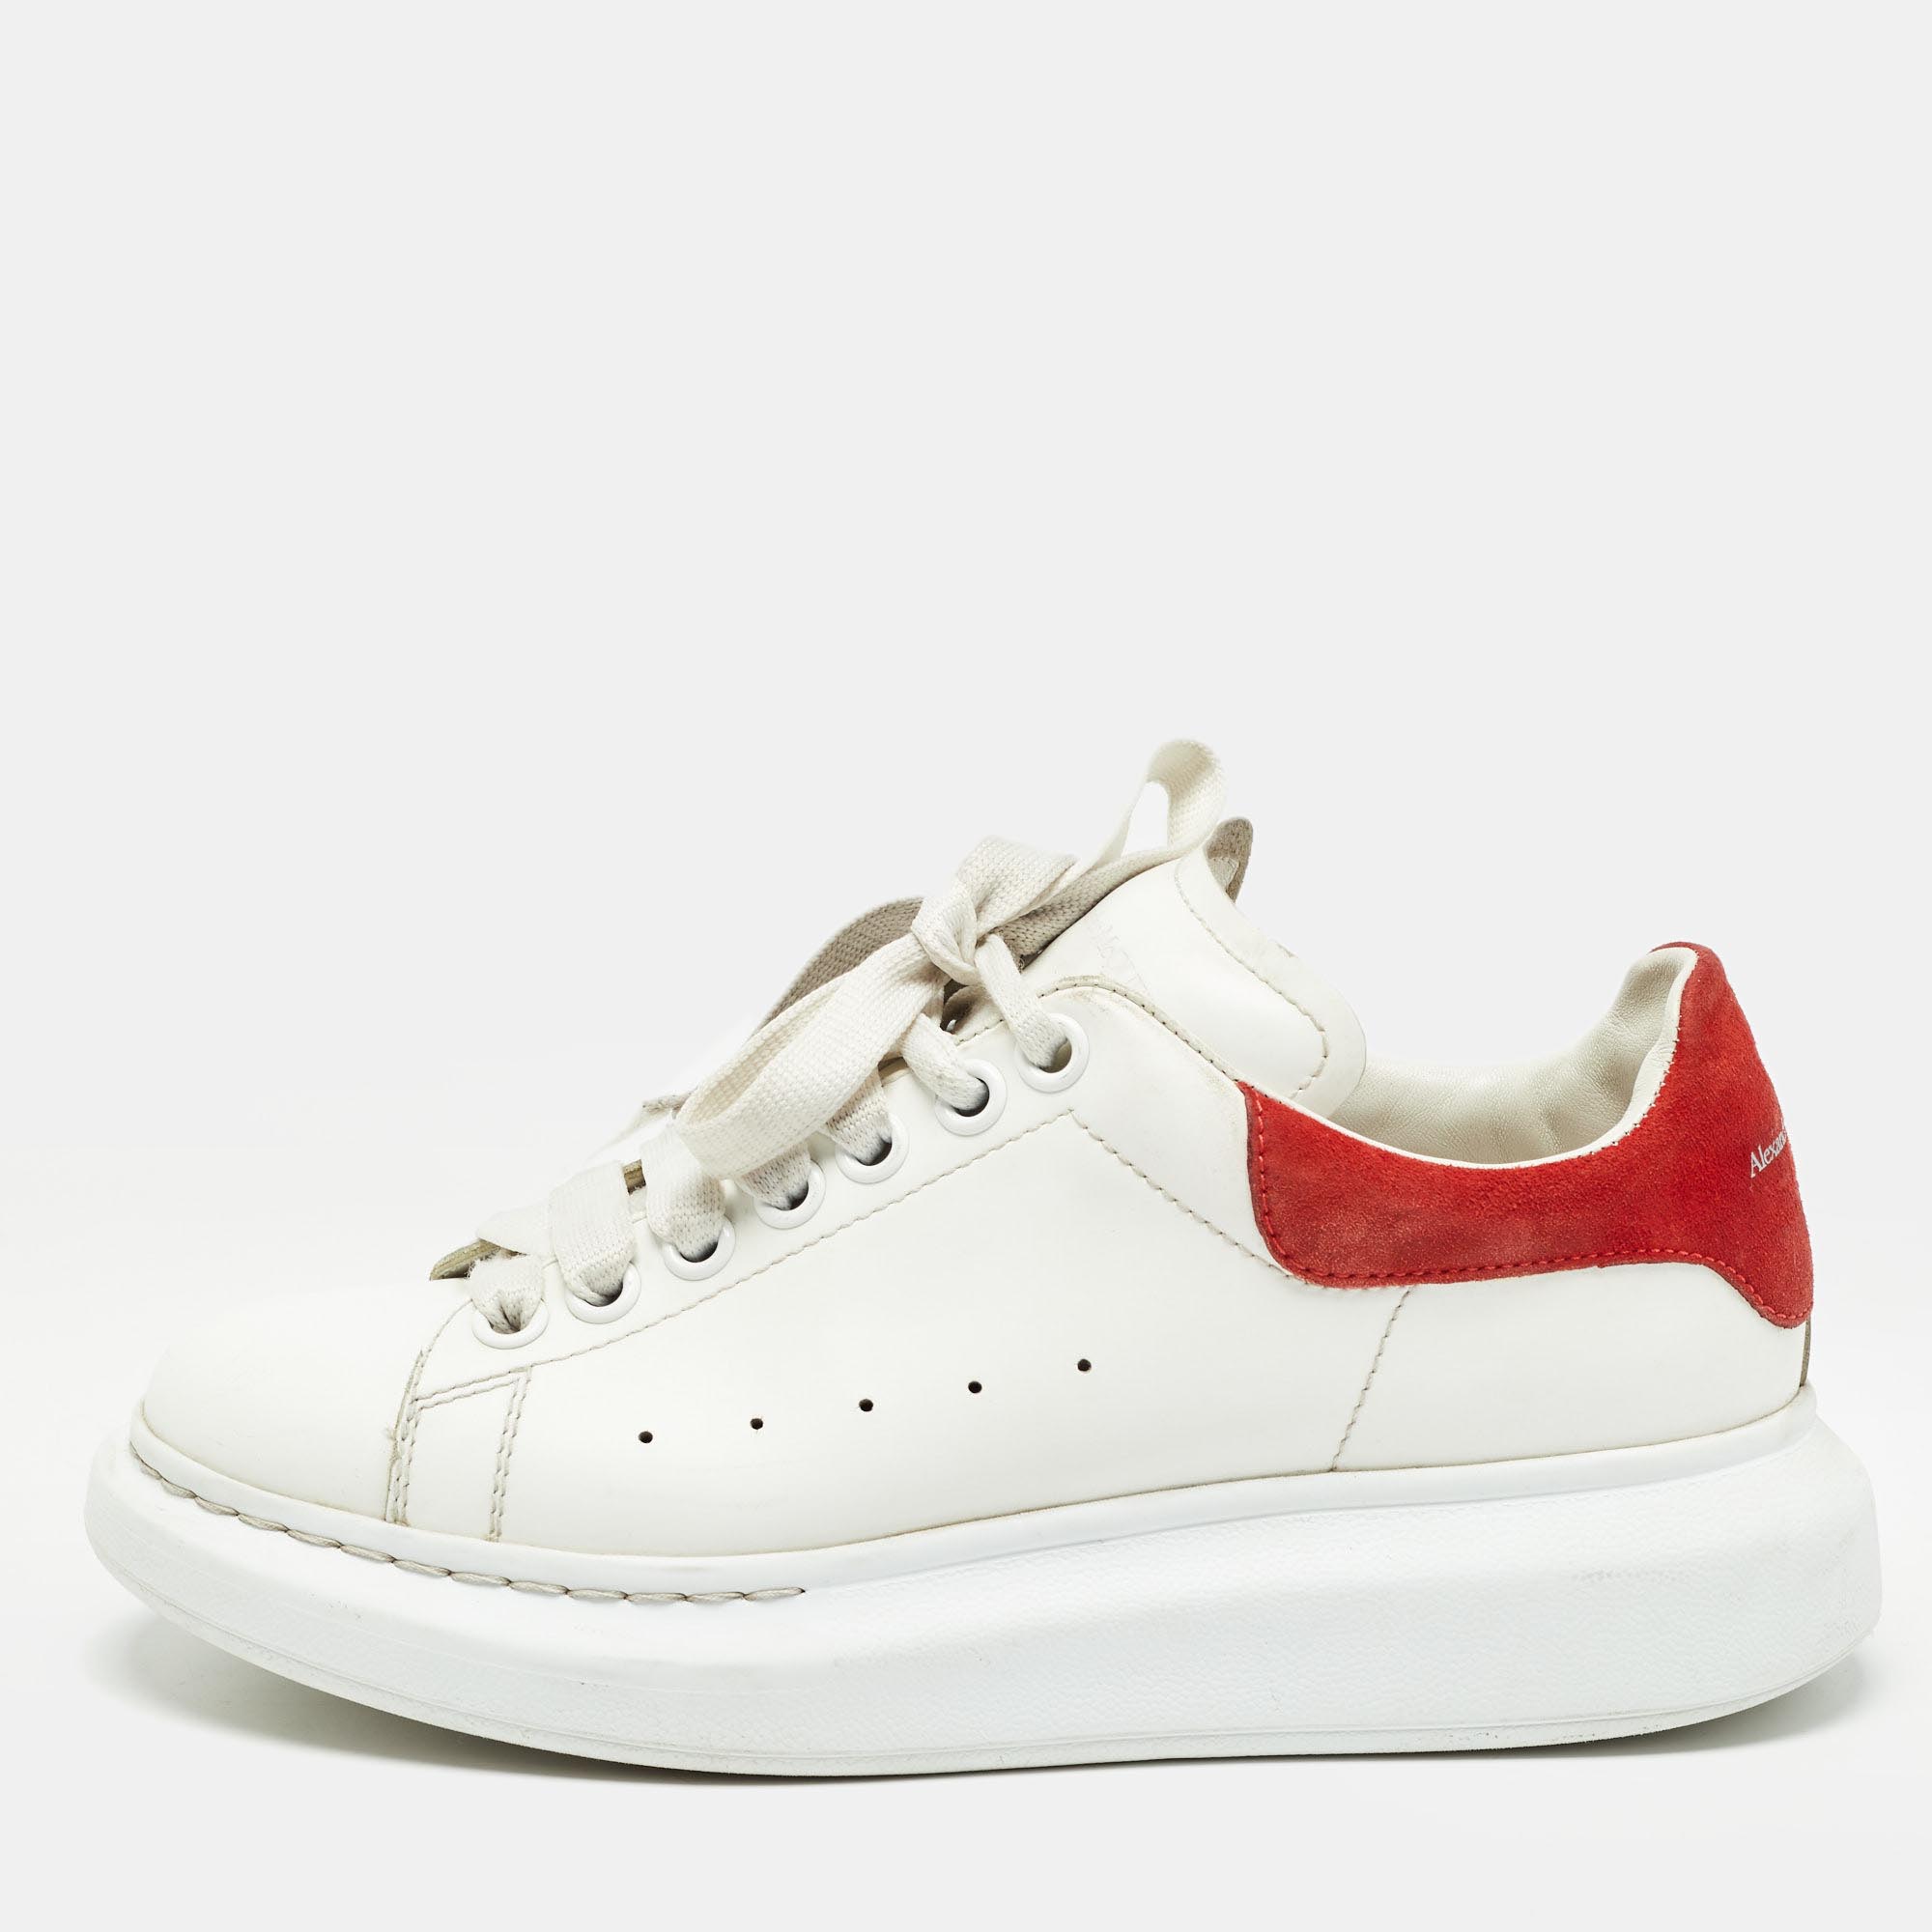 Alexander mcqueen white leather oversized sneakers size 38